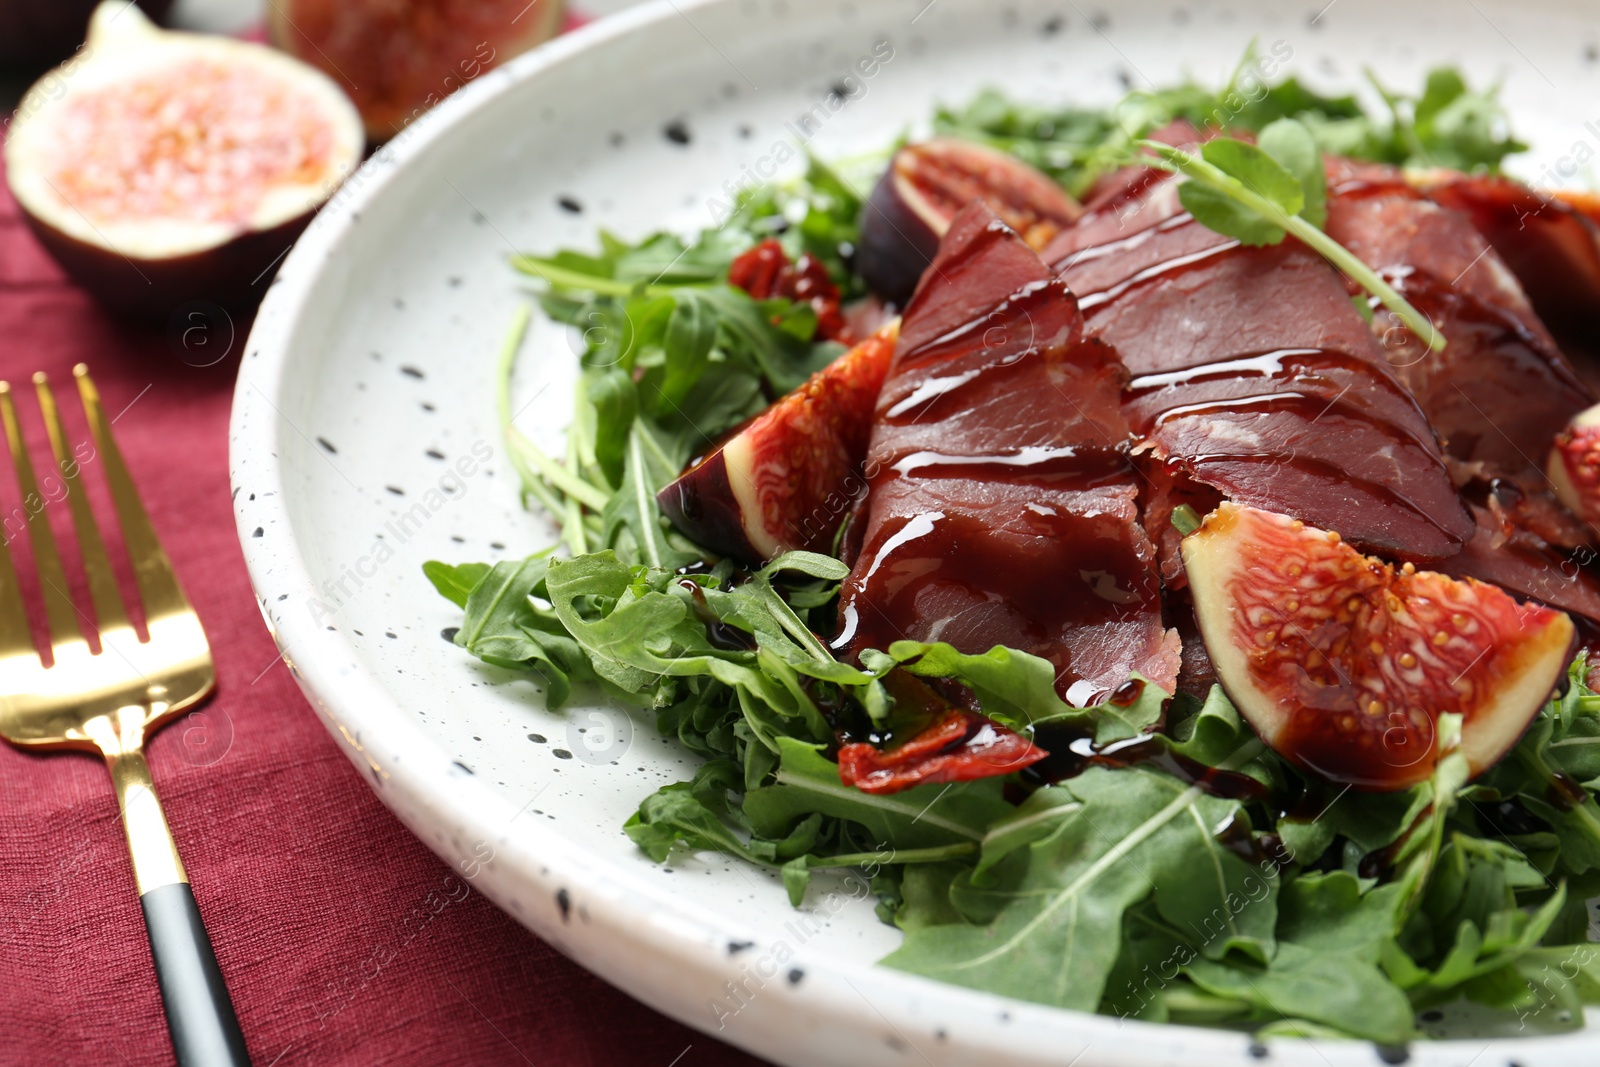 Photo of Plate of tasty bresaola salad with figs, sun-dried tomatoes, balsamic vinegar and fork on table, closeup